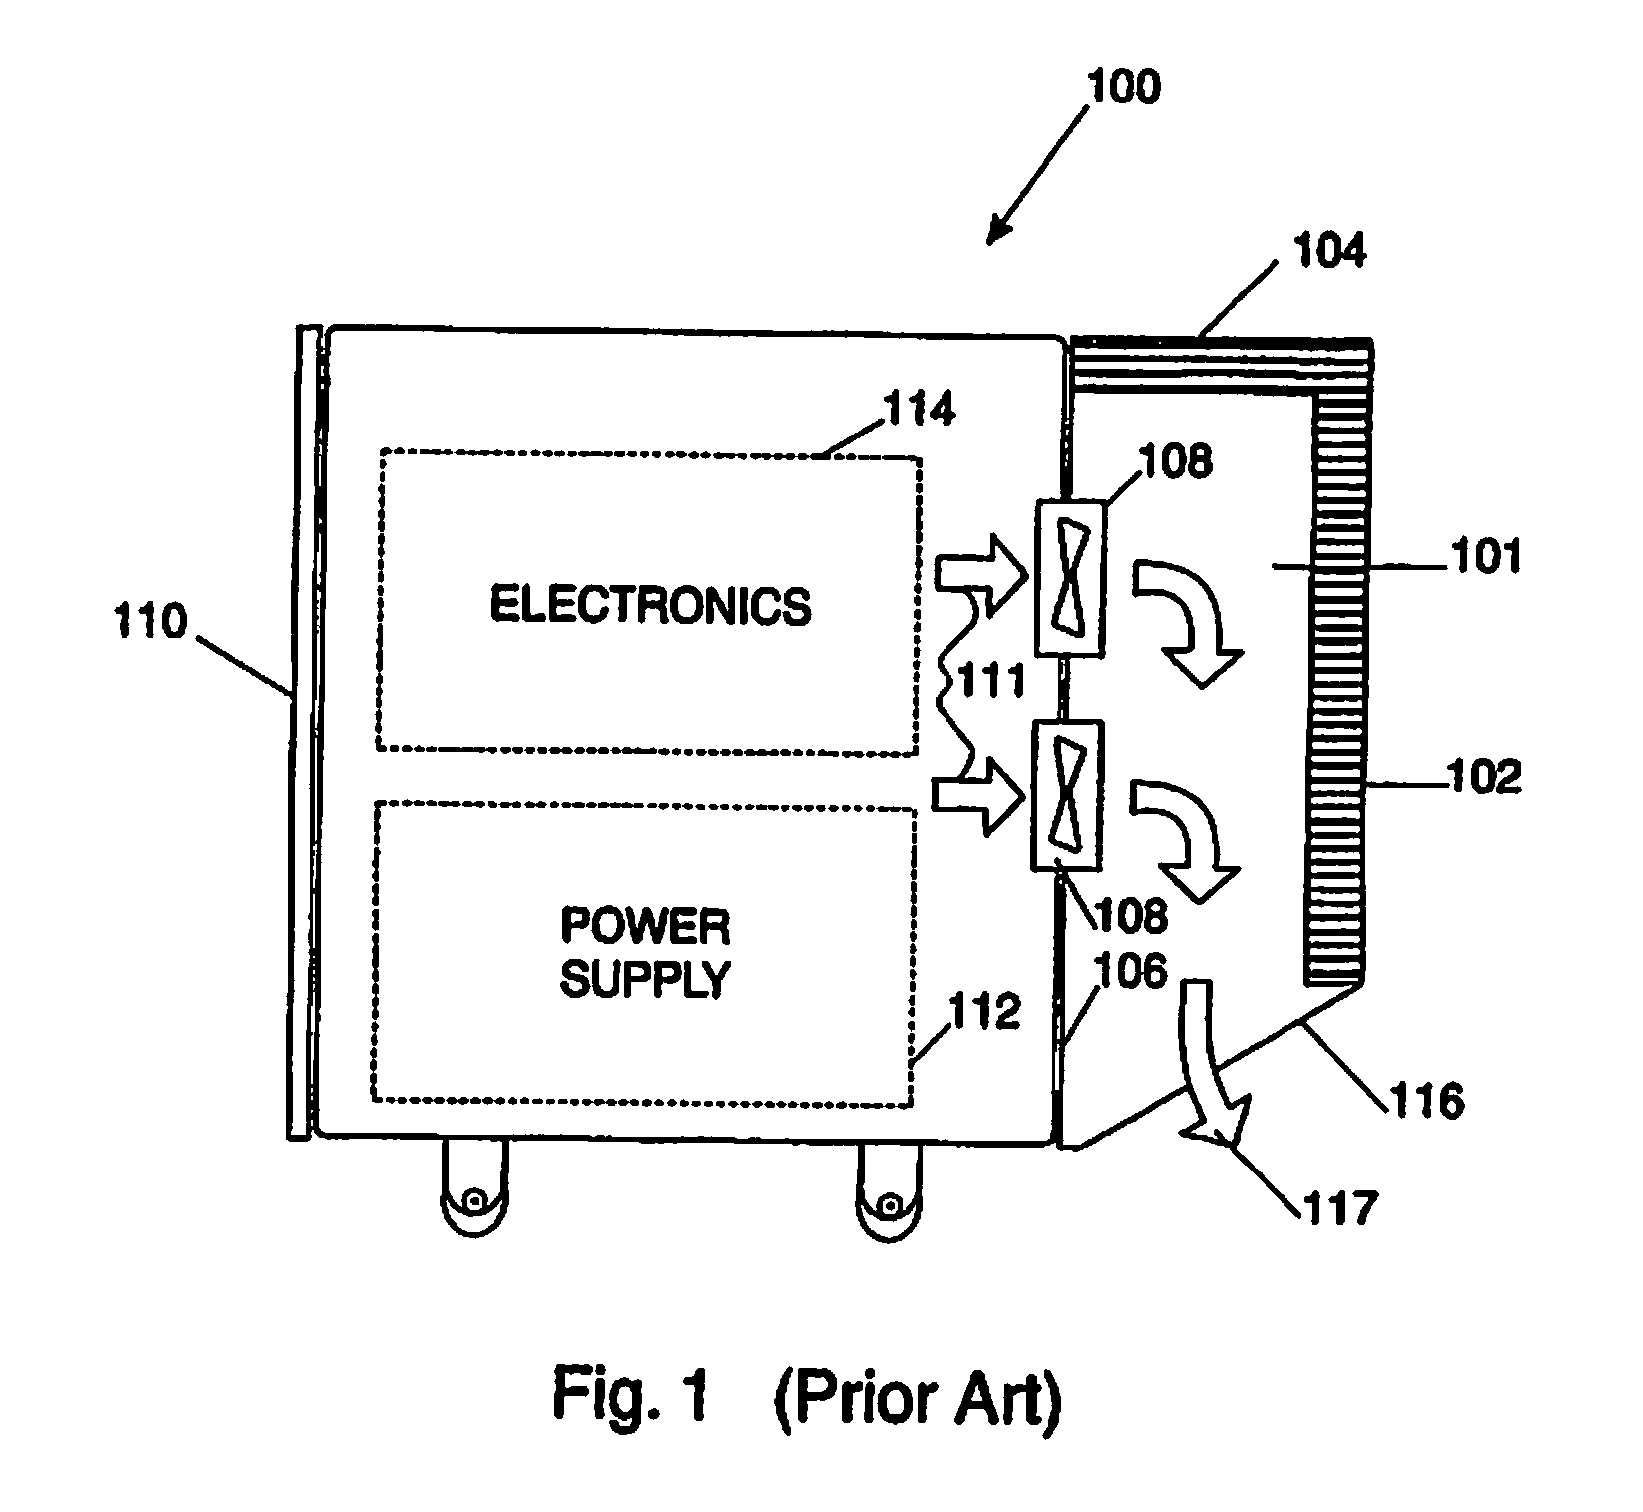 Method and Apparatus for Acoustic Noise Reduction in a Computer System Having a Vented Cover